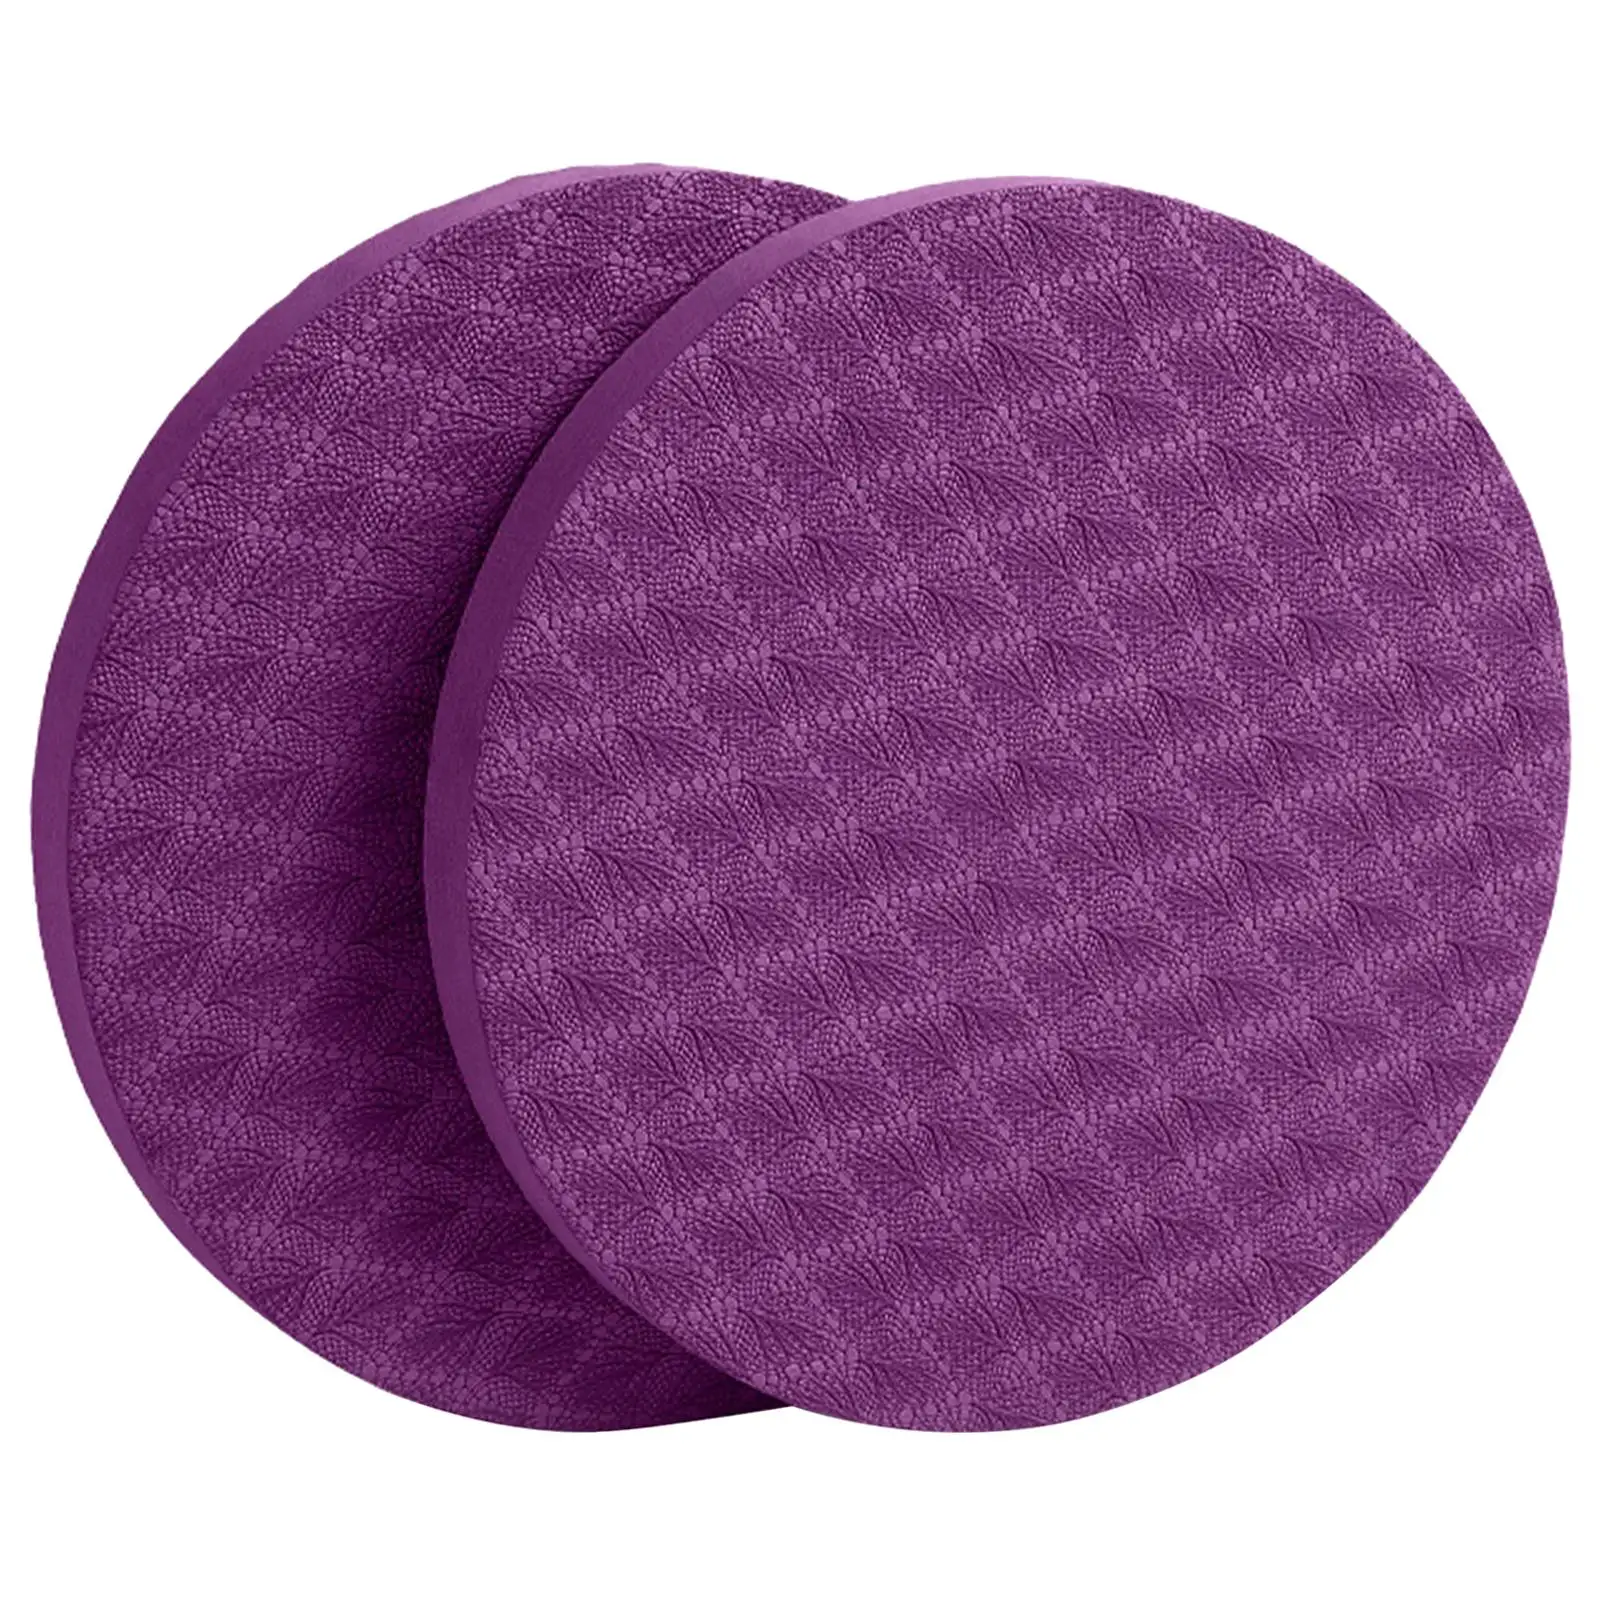 Small Round Knee Pad Yoga Mats 1 Pair Balance Trainer Stretching for Pilates